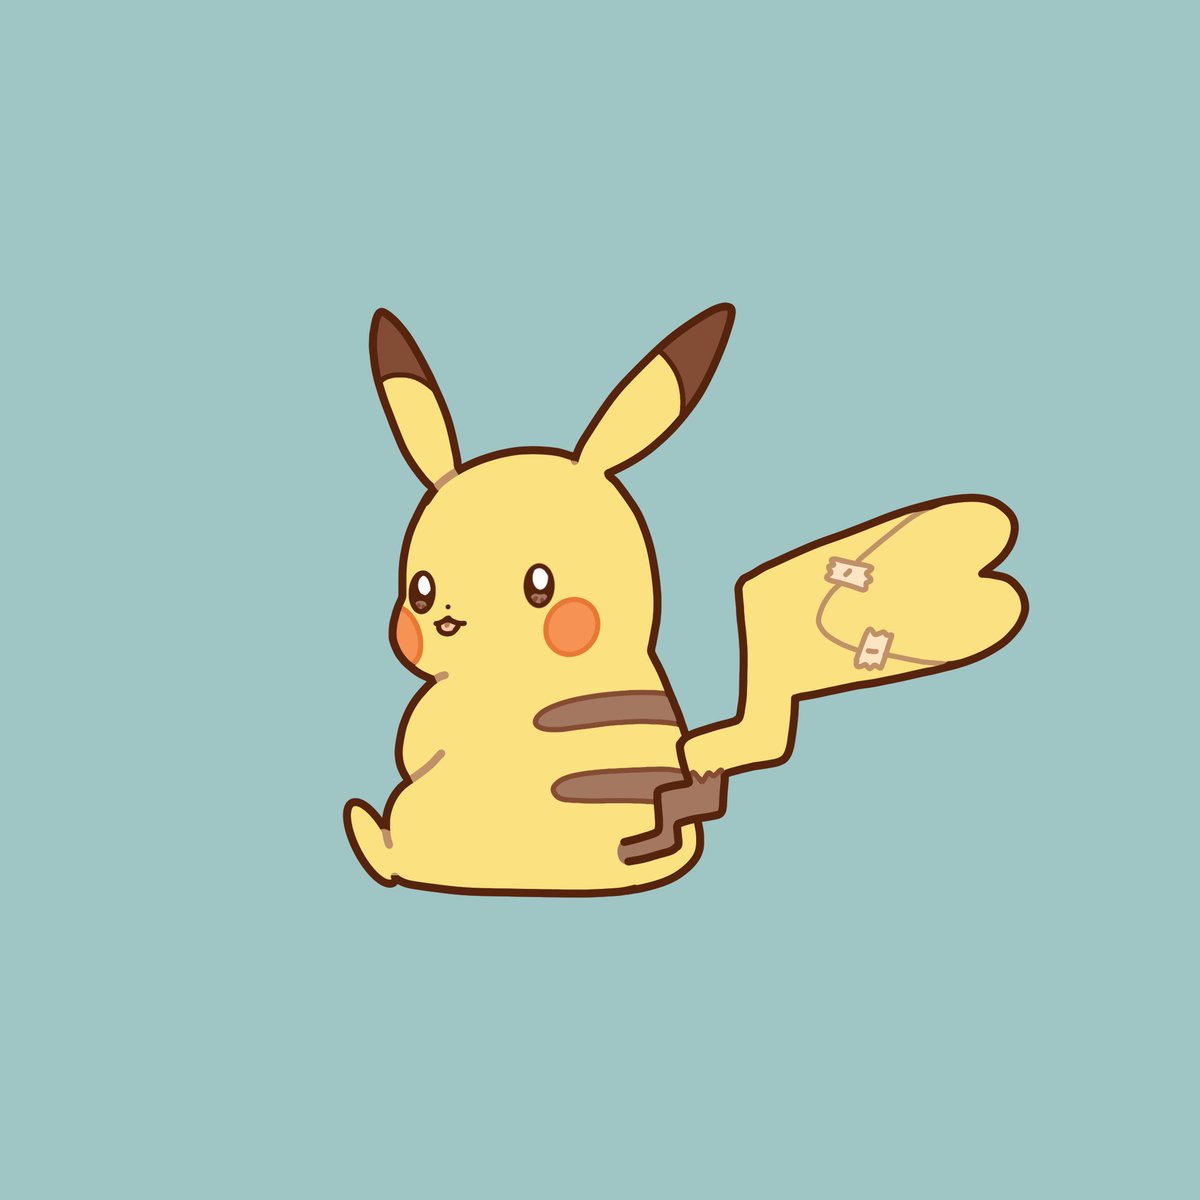 pikachu solo smile open mouth simple background sitting full body pokemon (creature)  illustration images